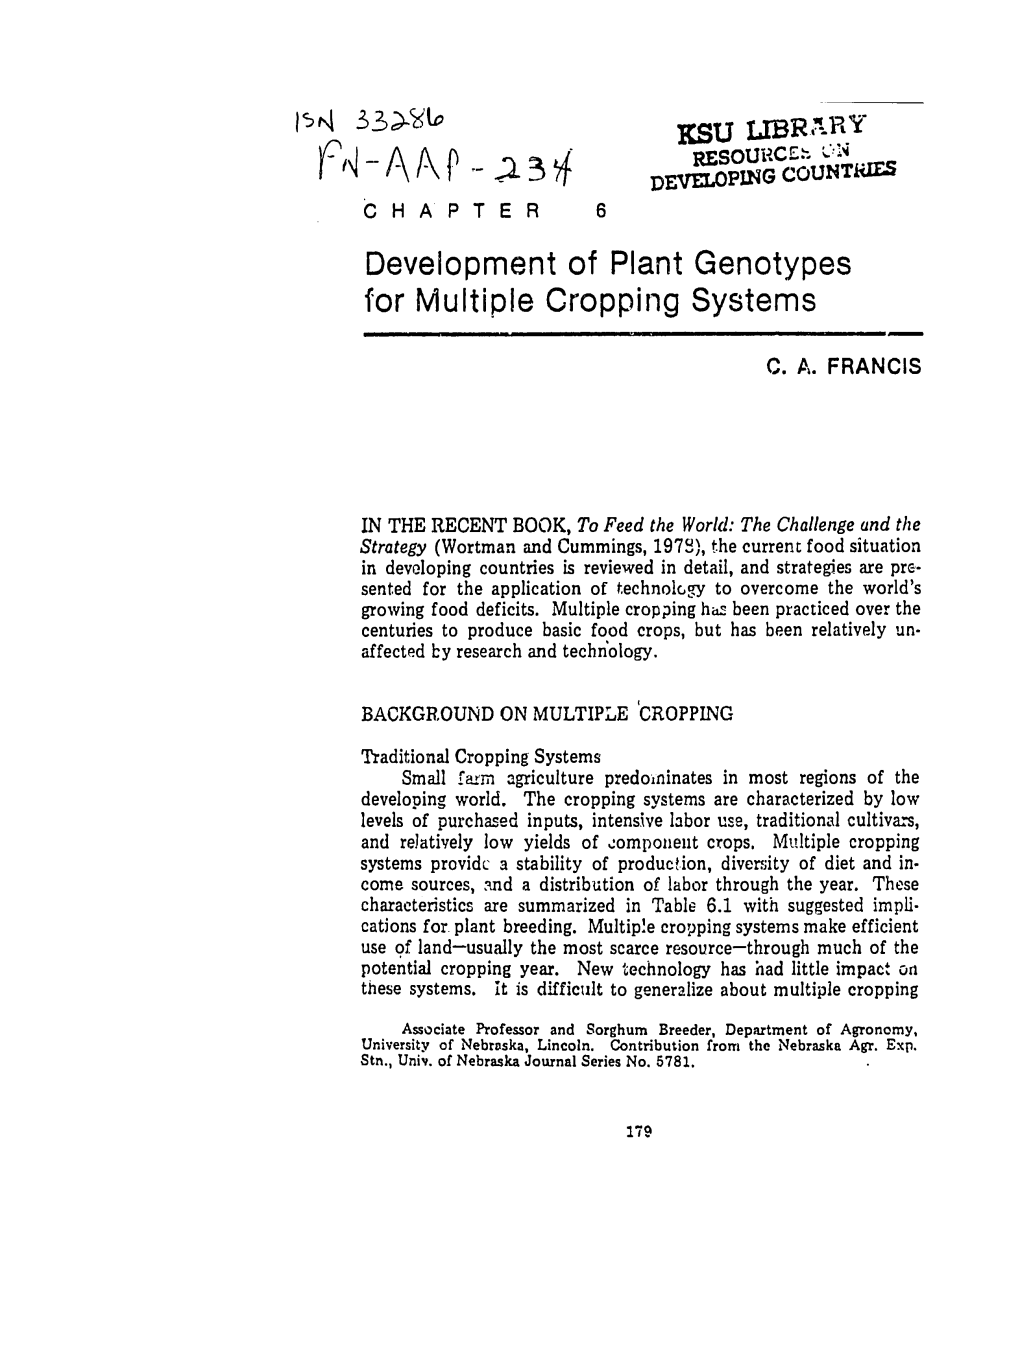 Development of Plant Genotypes for Multiple Cropping Systems